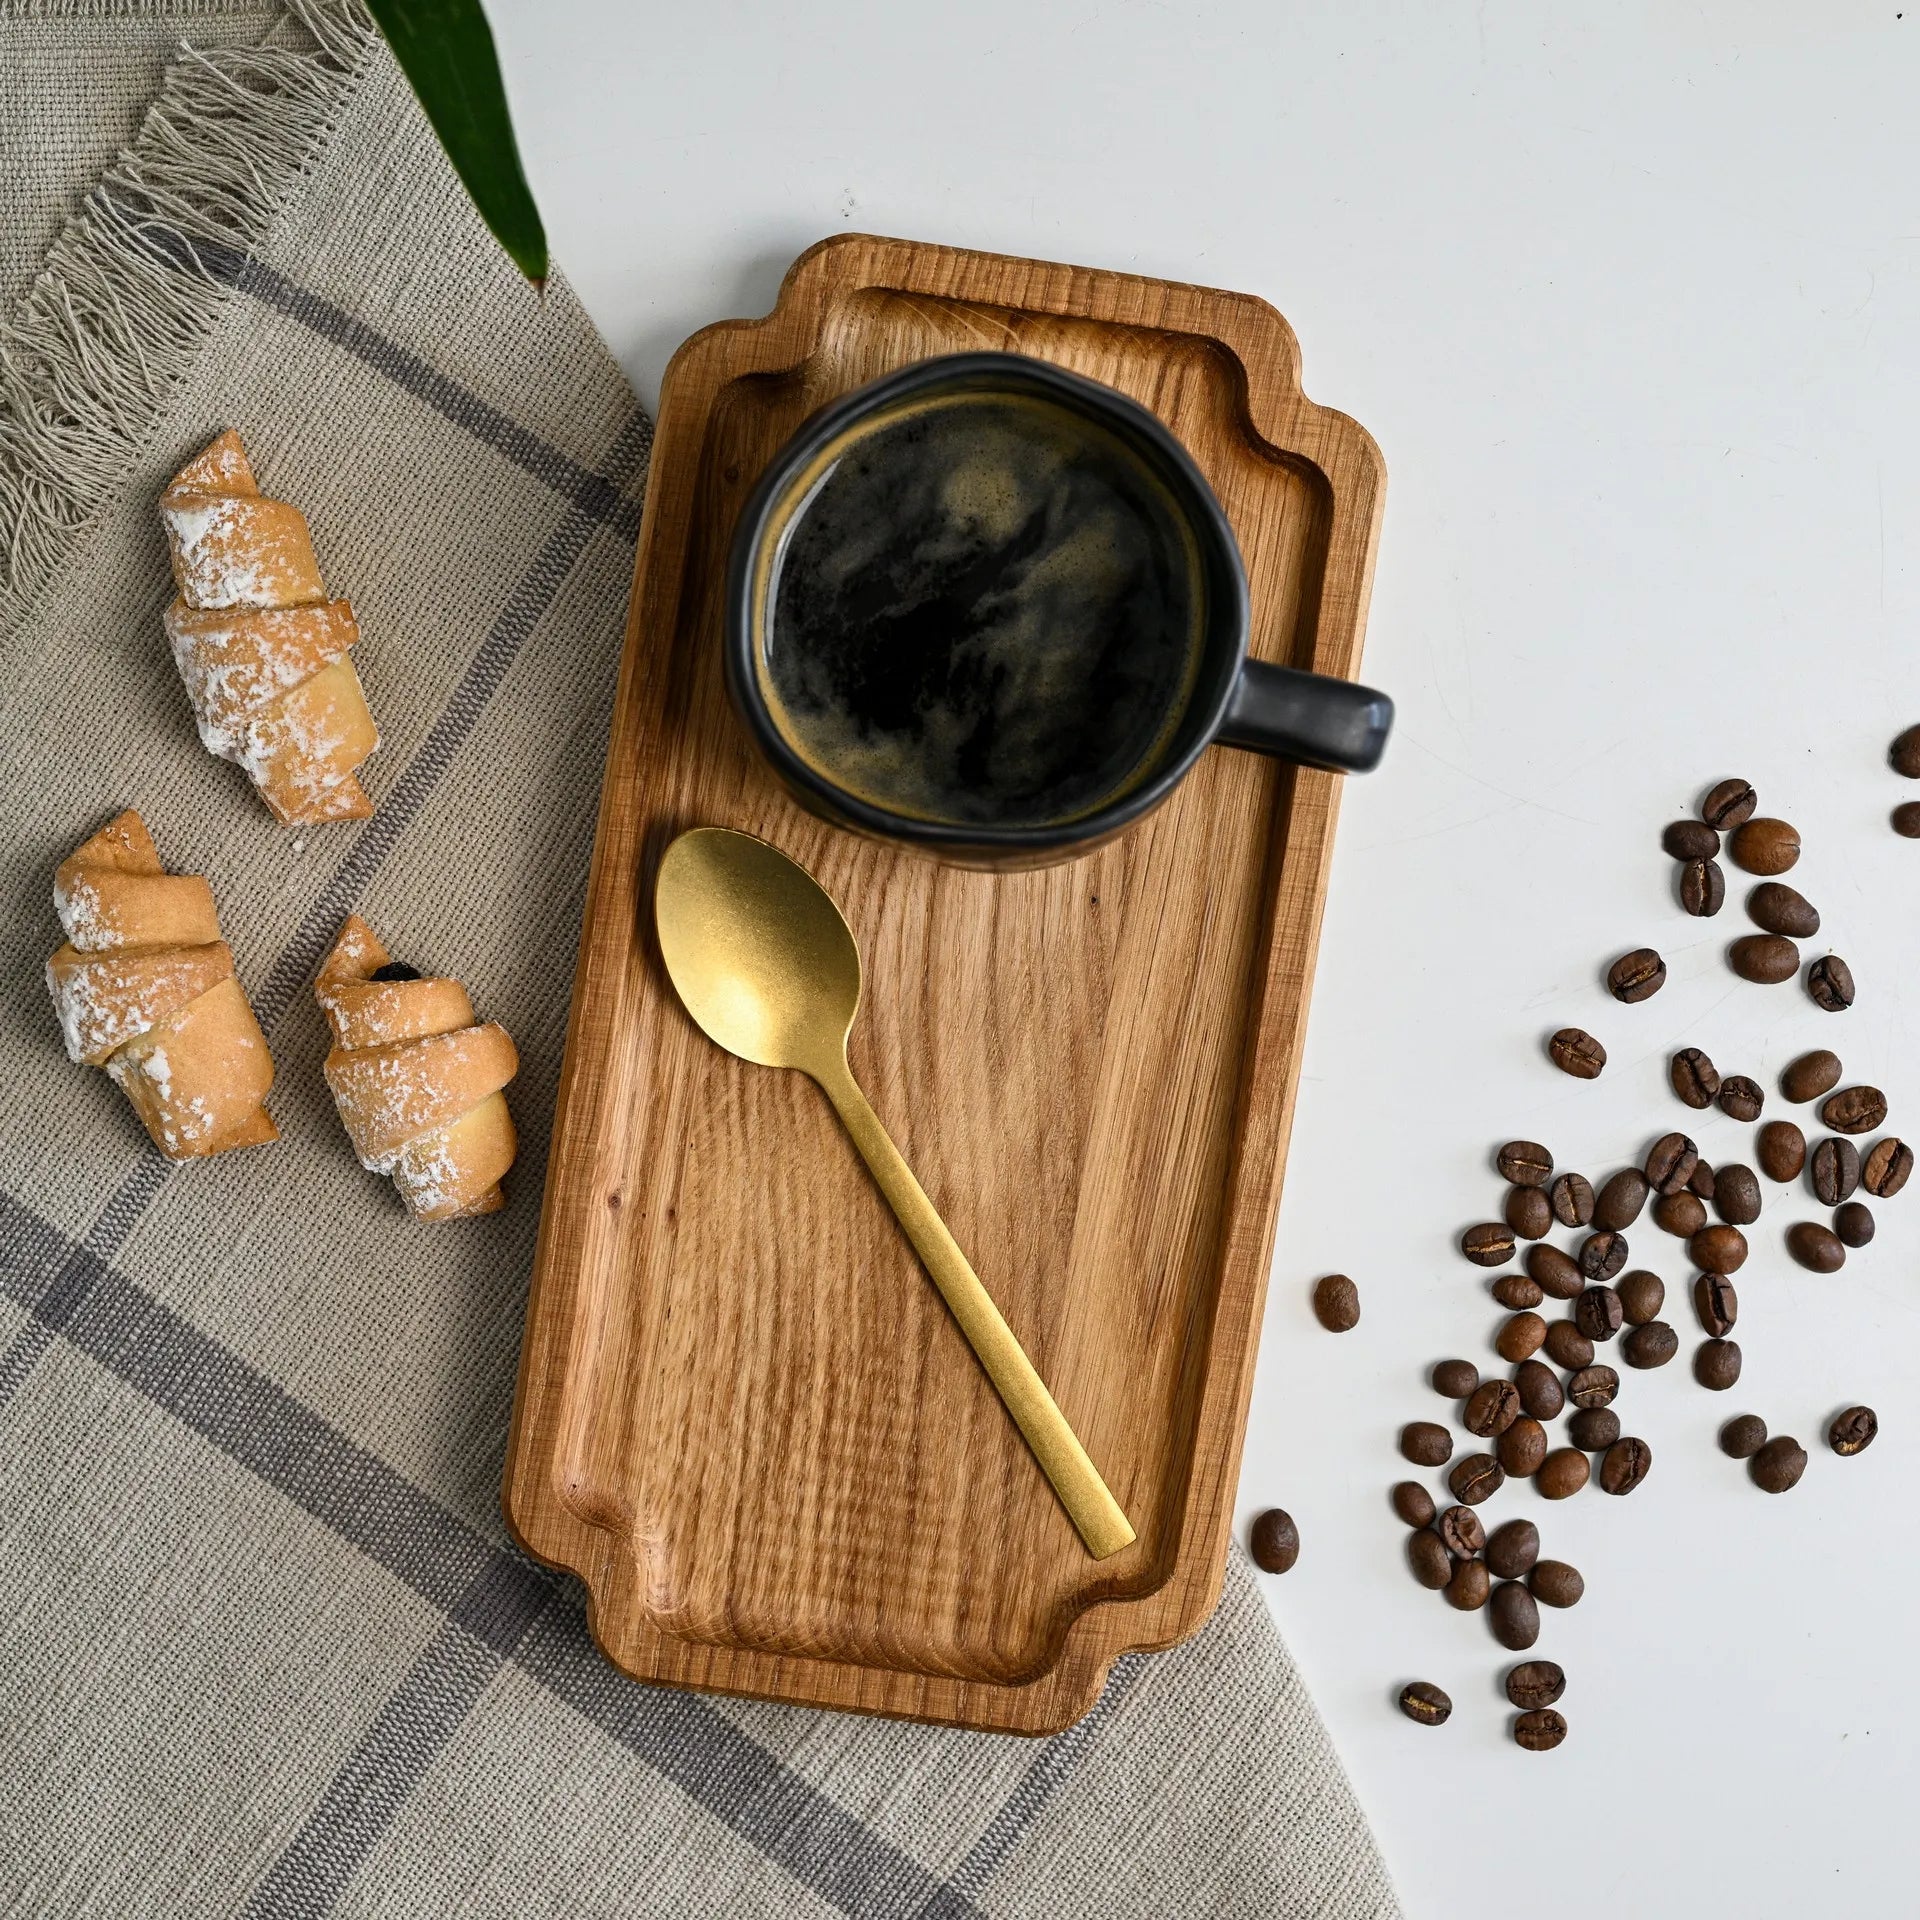 Personalized serving tray for restaurants, crafted from rustic wood, providing a unique and stylish presentation.